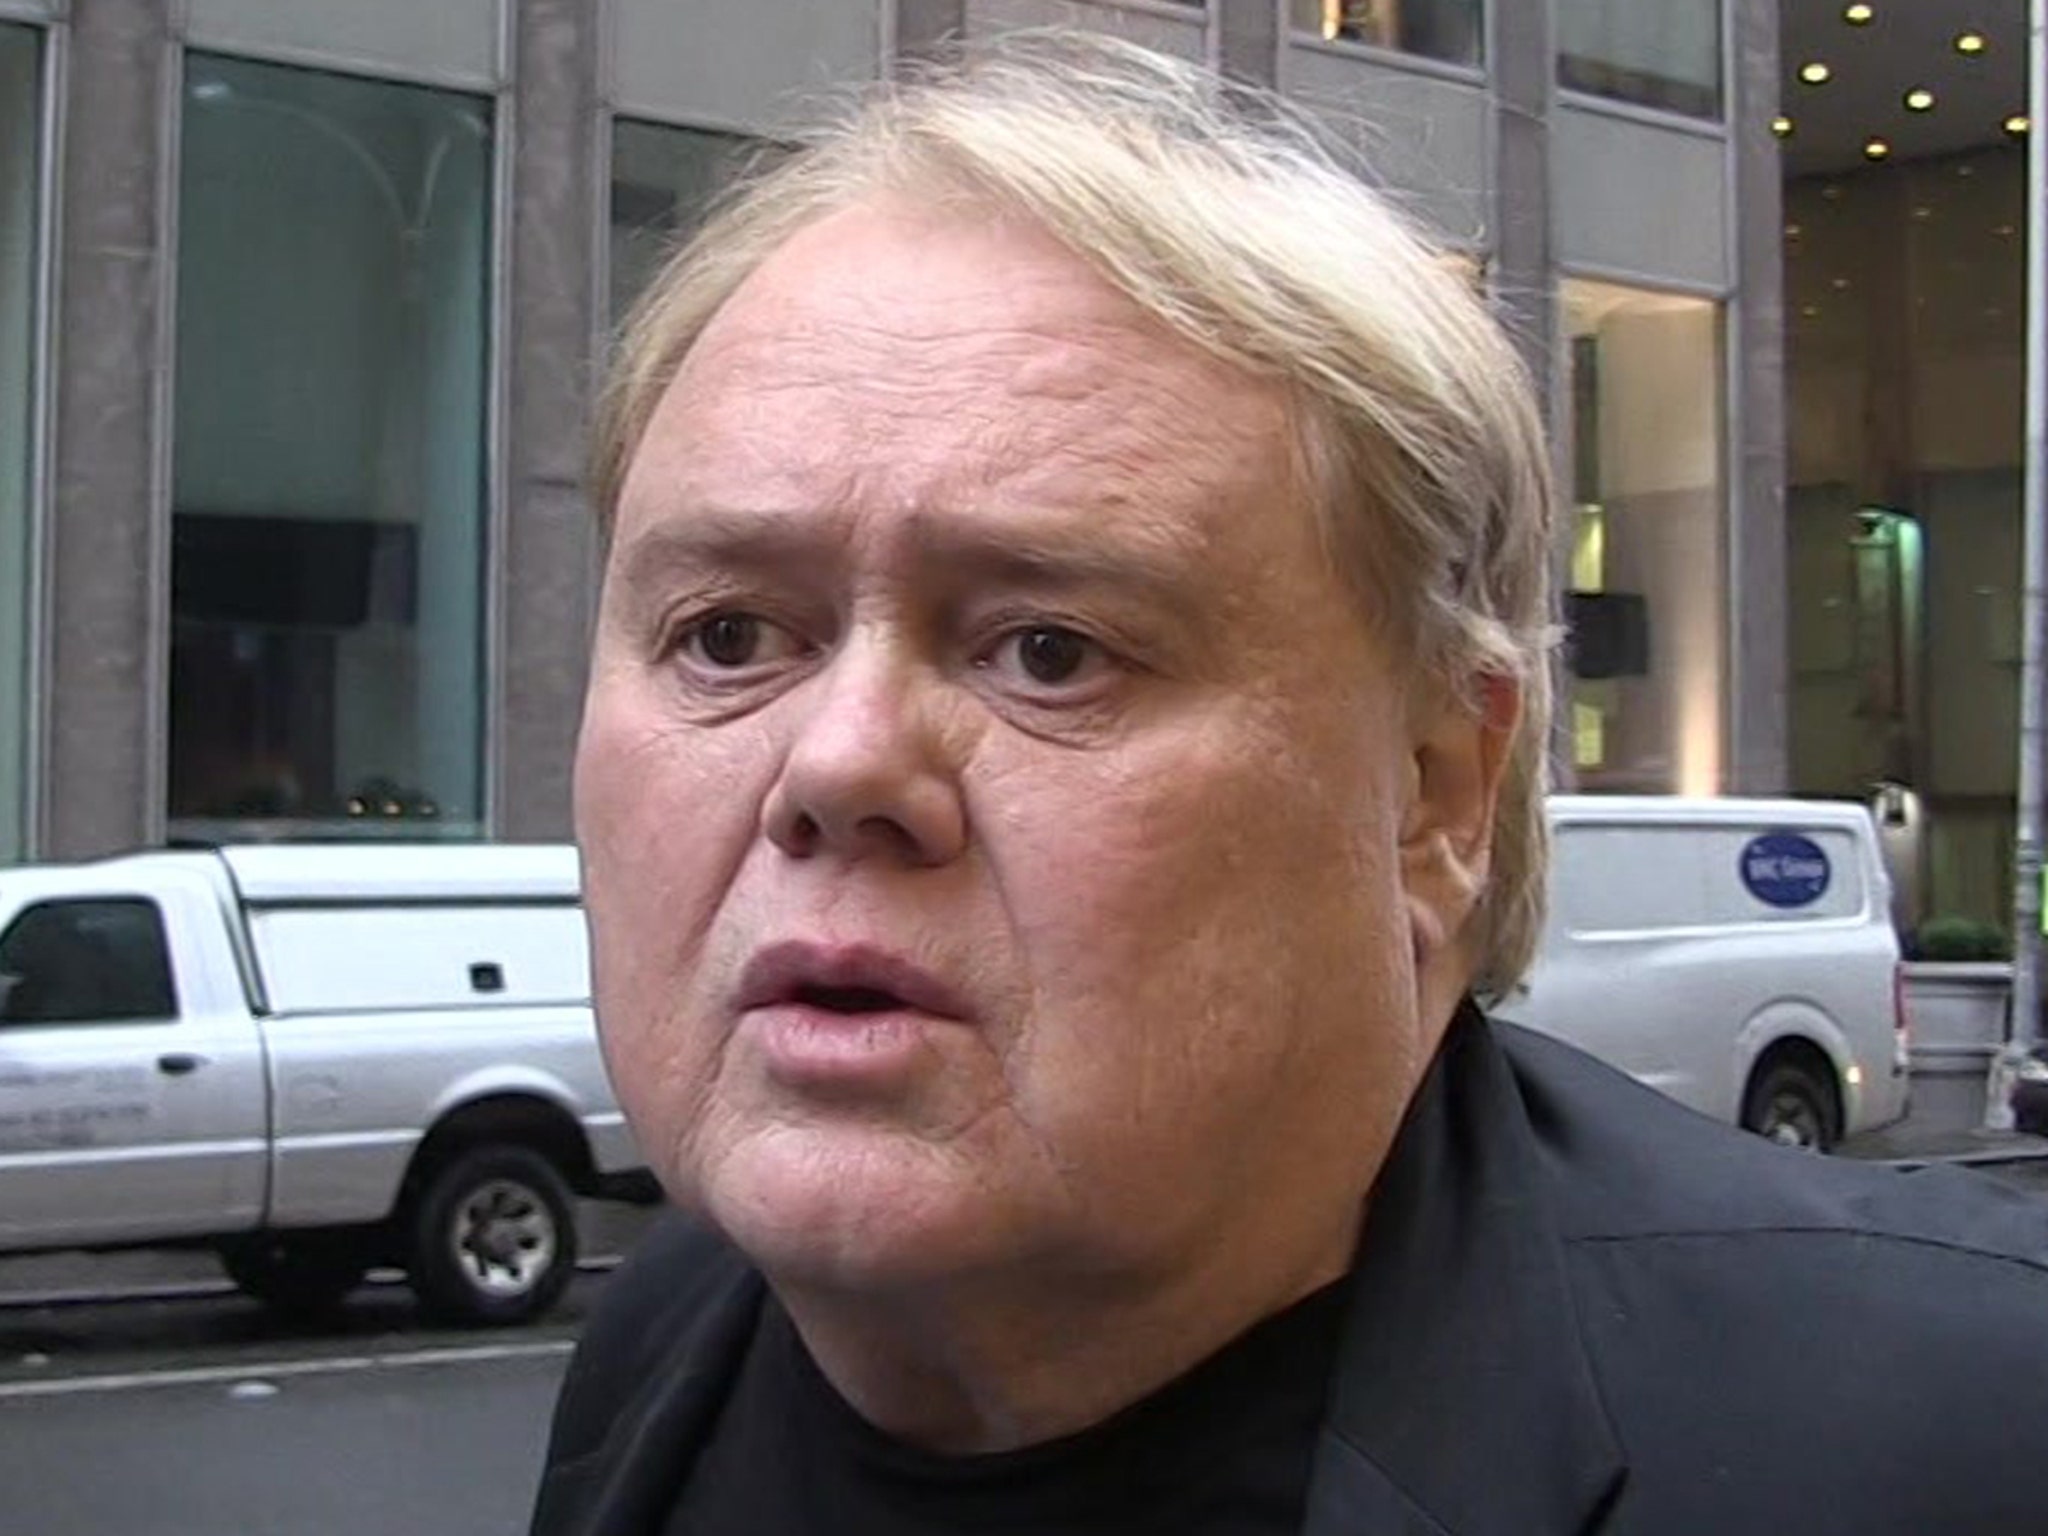 Comedian Louie Anderson Hospitalized for Blood Cancer Treatment